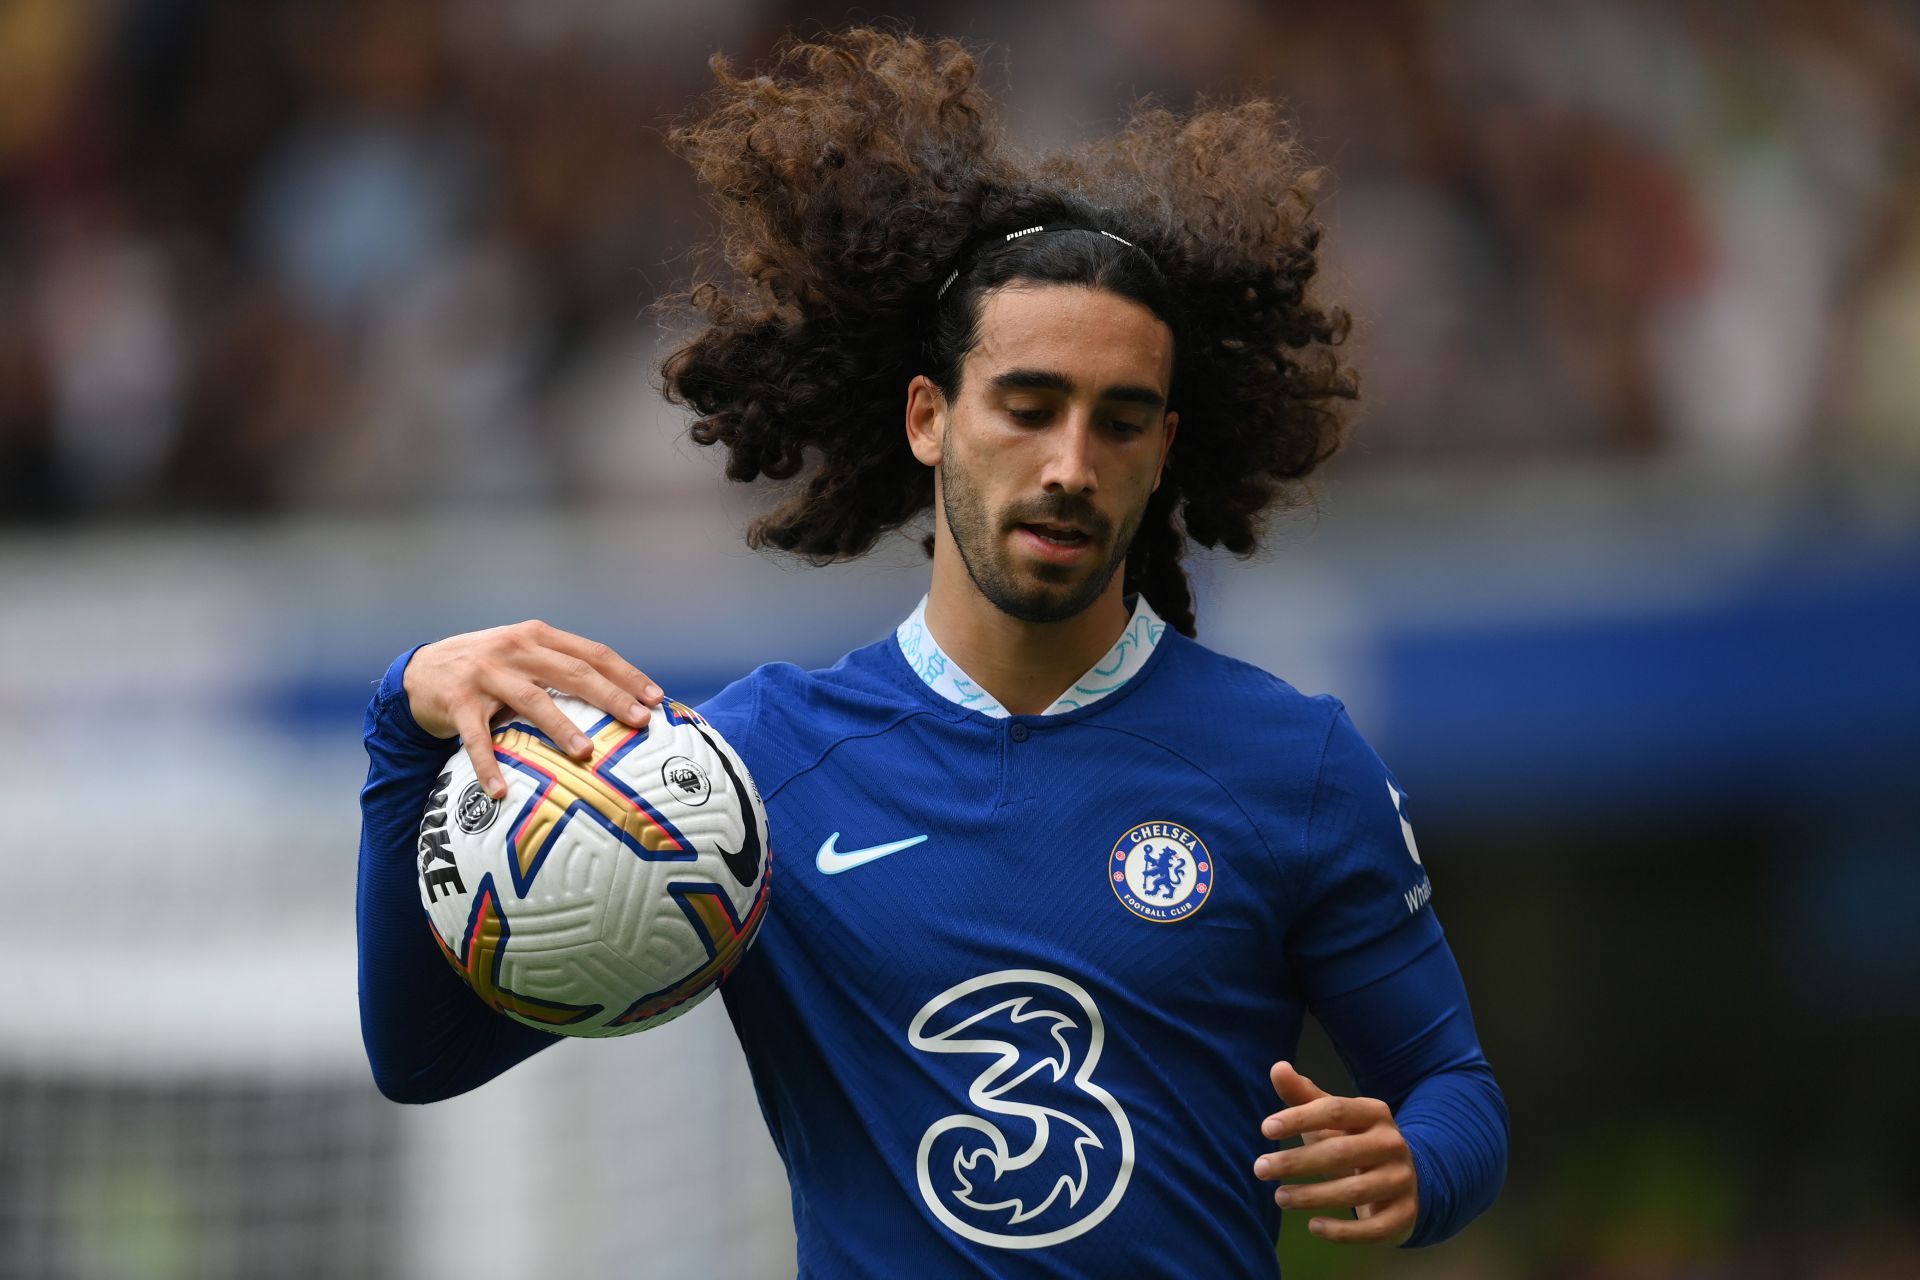 Marc Cucurella has two assists for Chelsea this season.